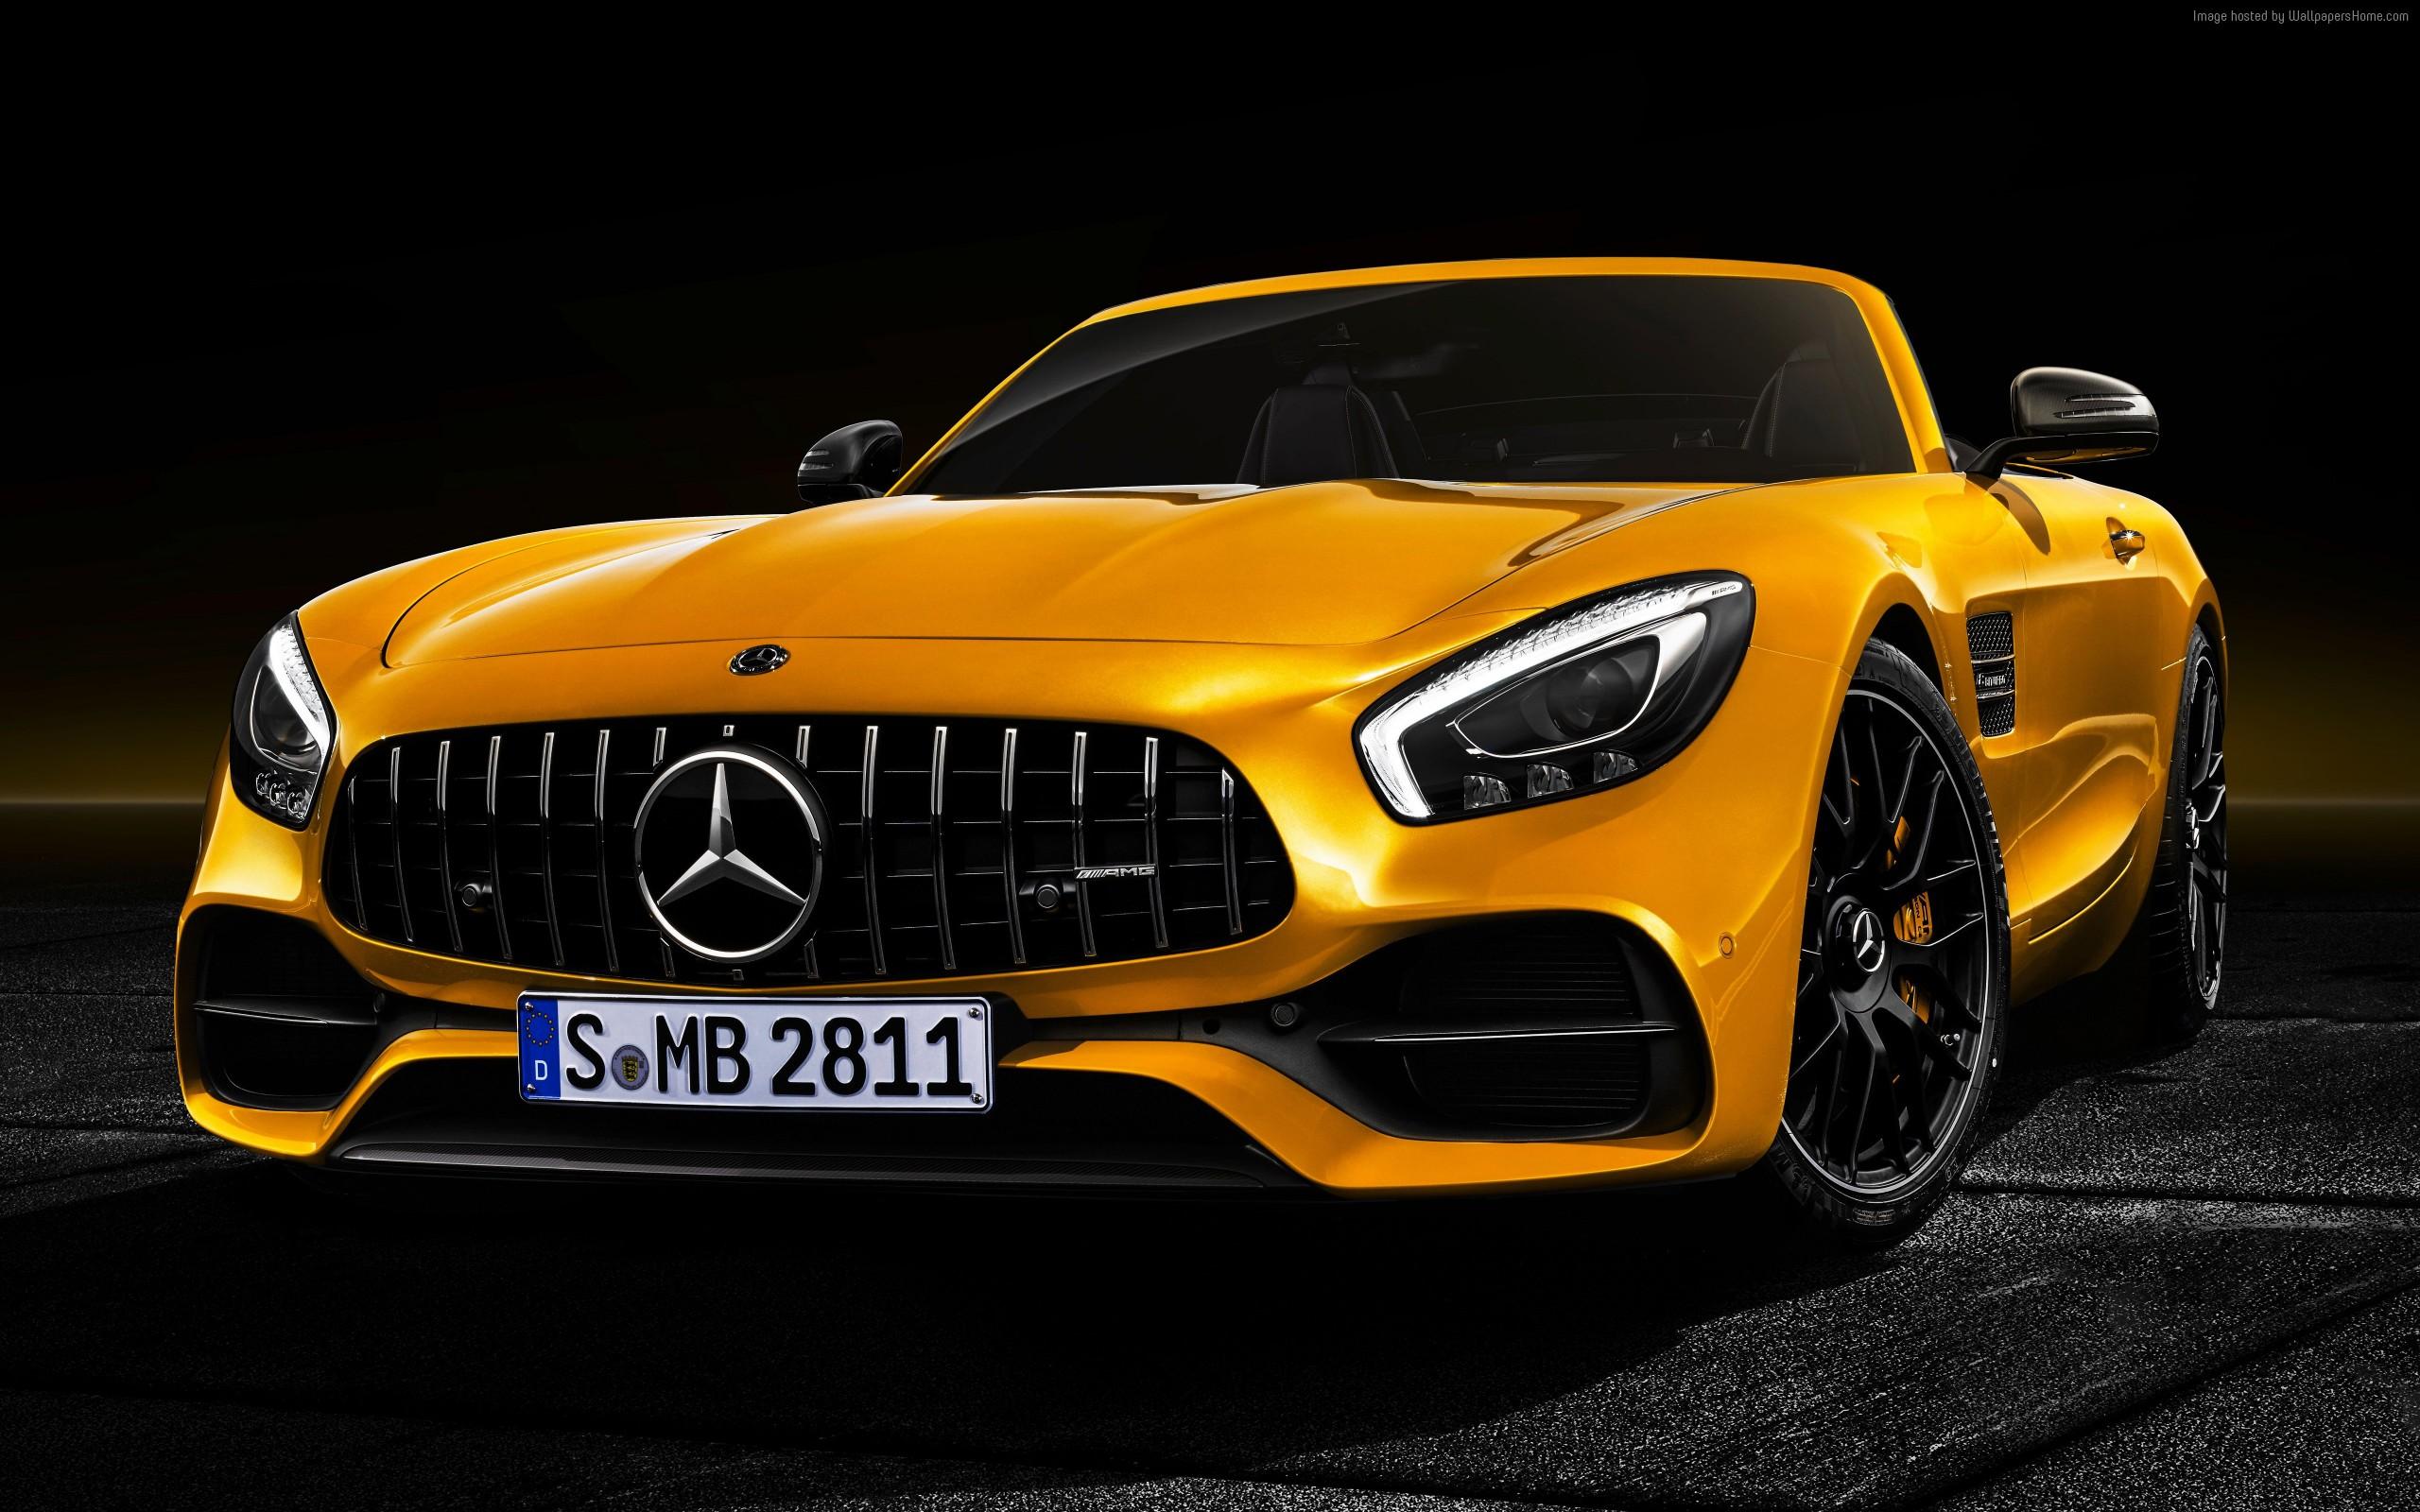 Wallpaper Of Mercedes Benz AMG GT S Roadster, 2019 Cars